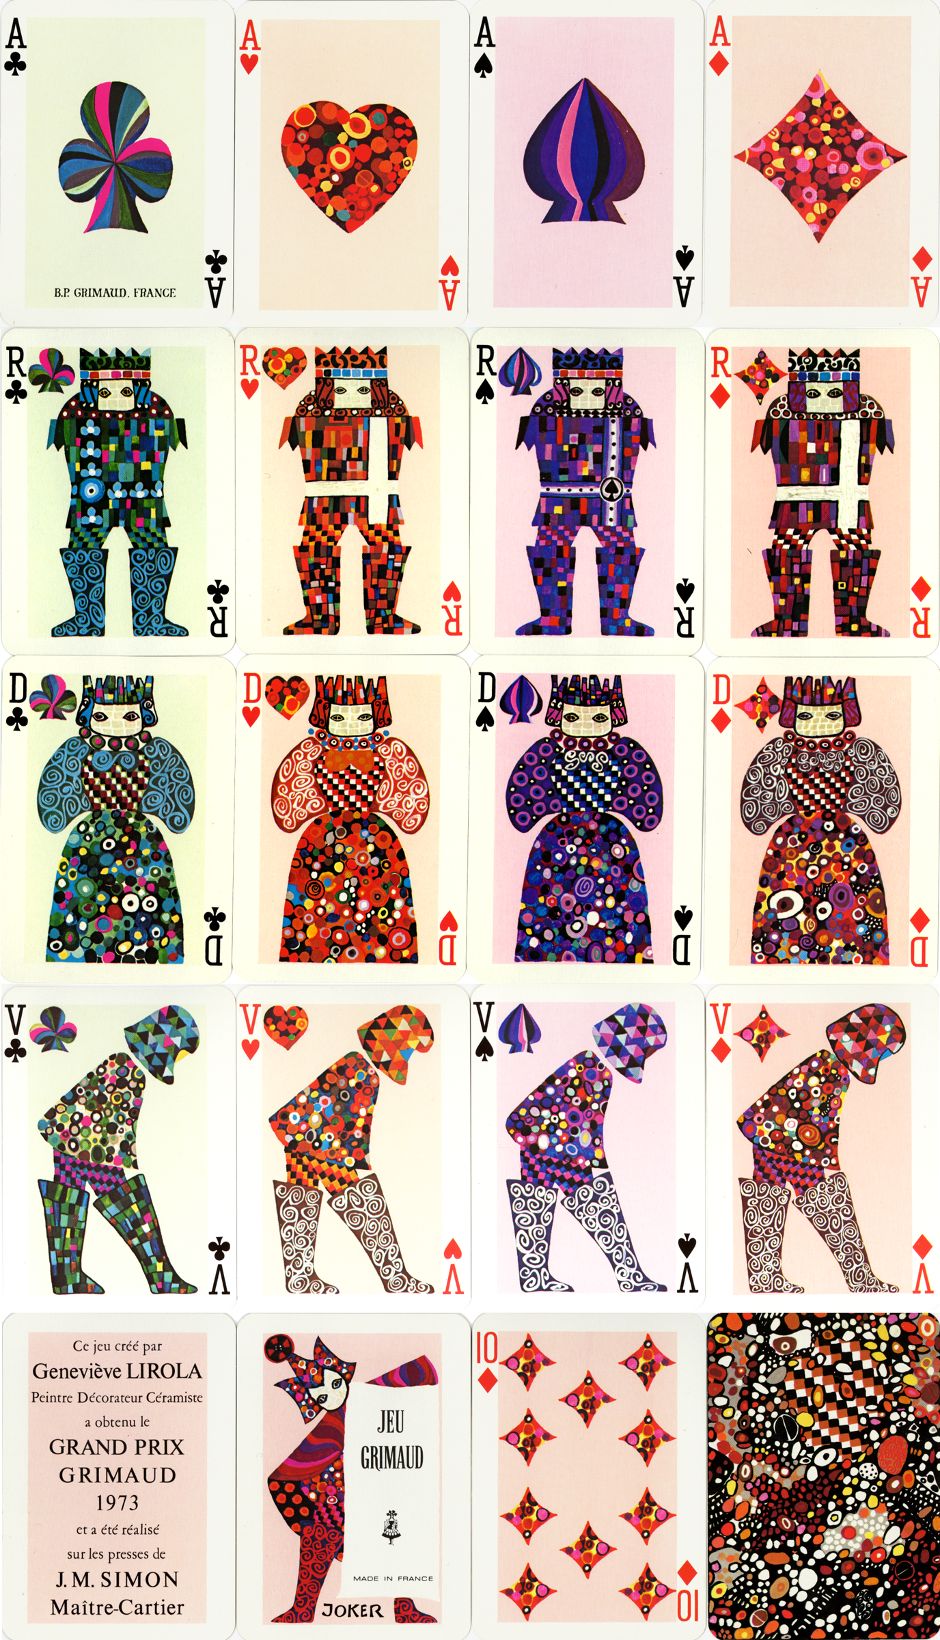 playing cards designed by Geneviève Lirola in 1973